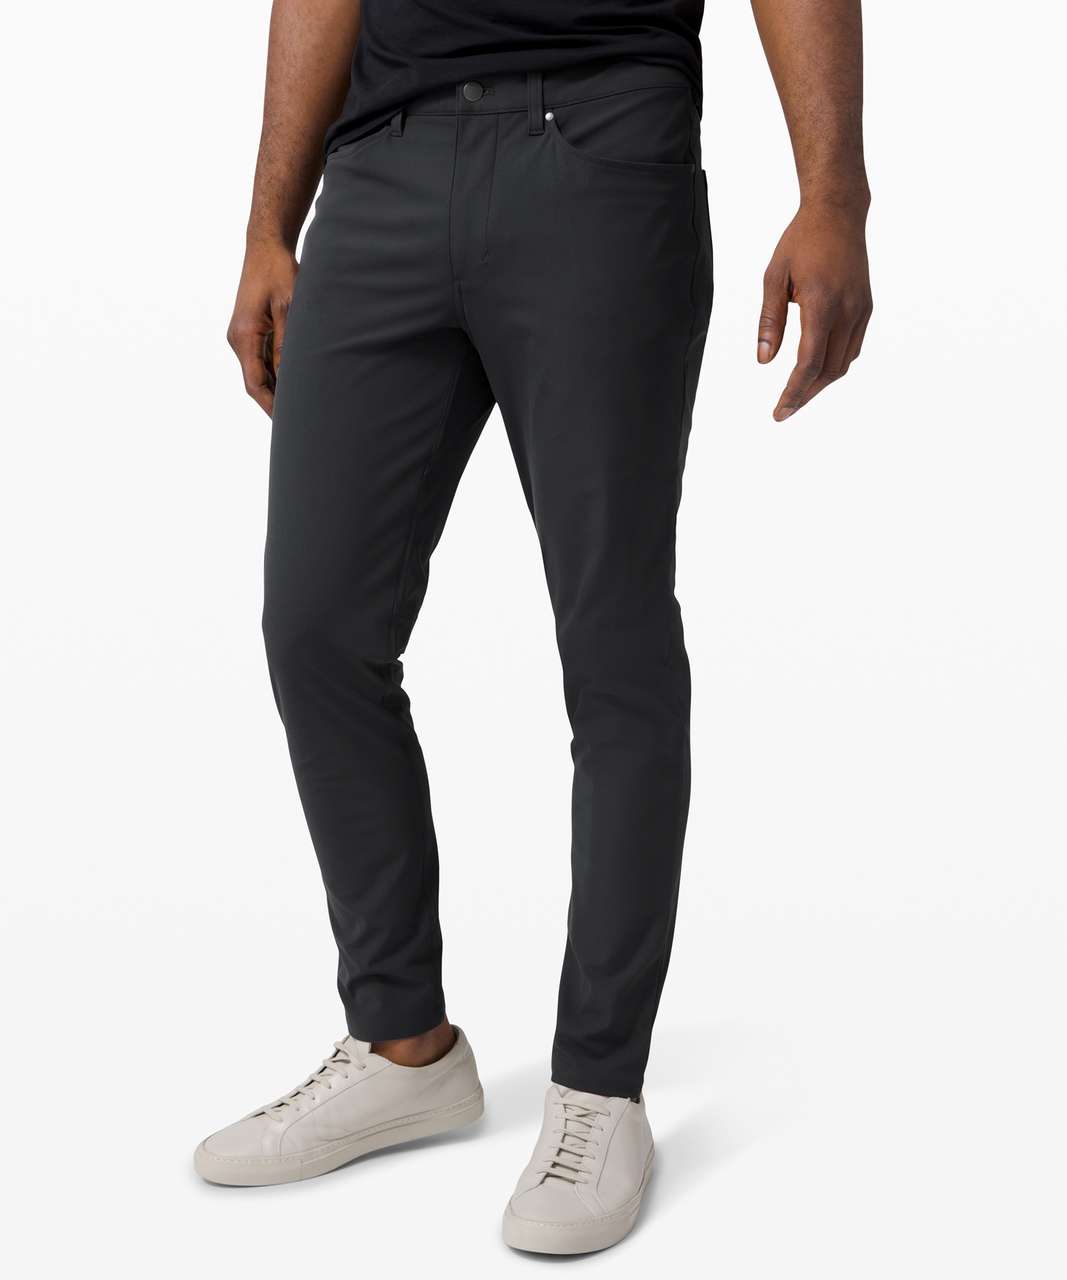 NWT Lululemon Men's ABC Pull On Pant Size Small Color Obsidian